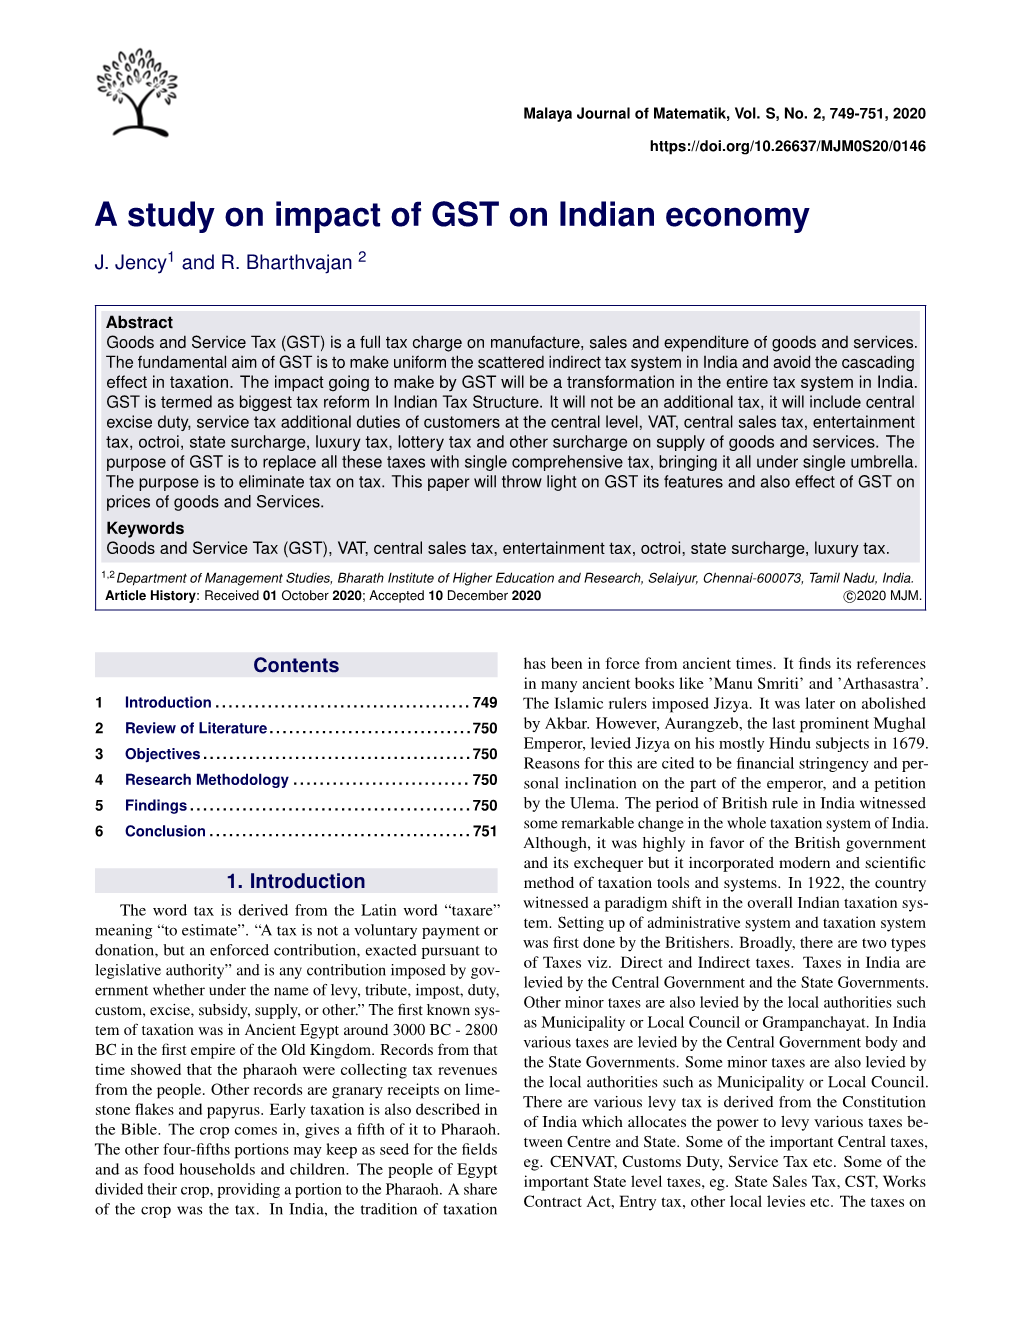 A Study on Impact of GST on Indian Economy